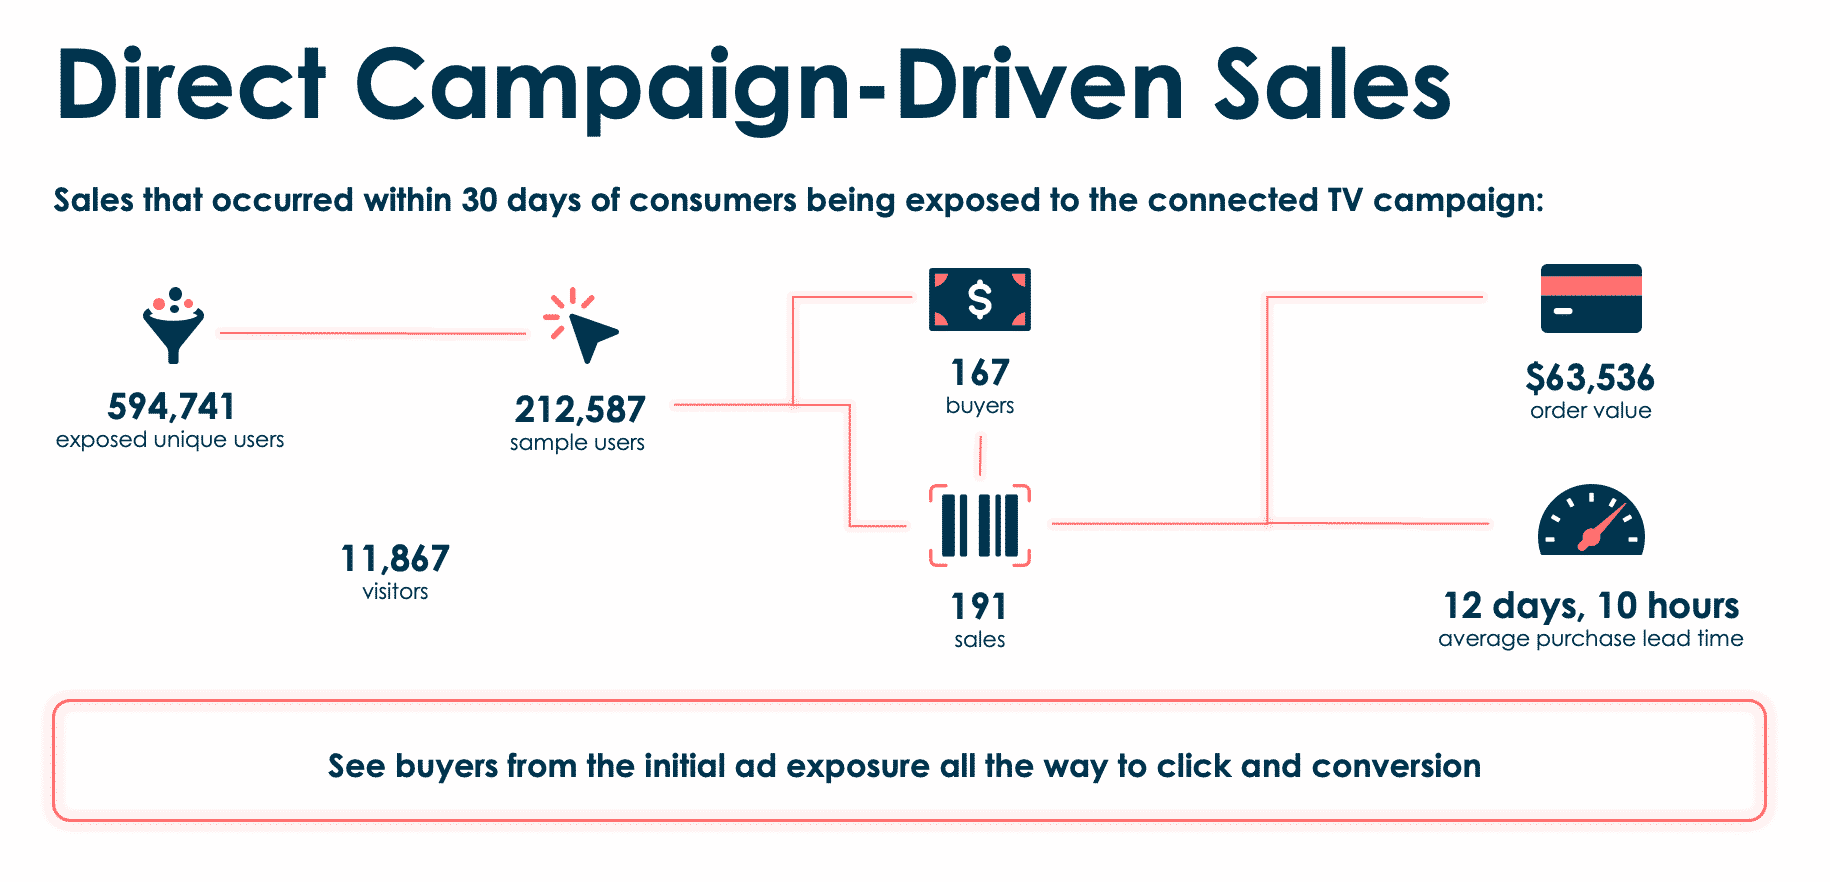 Diagram showing sales that occurred within 30 days of consumers being exposed to a connected TV campaign.